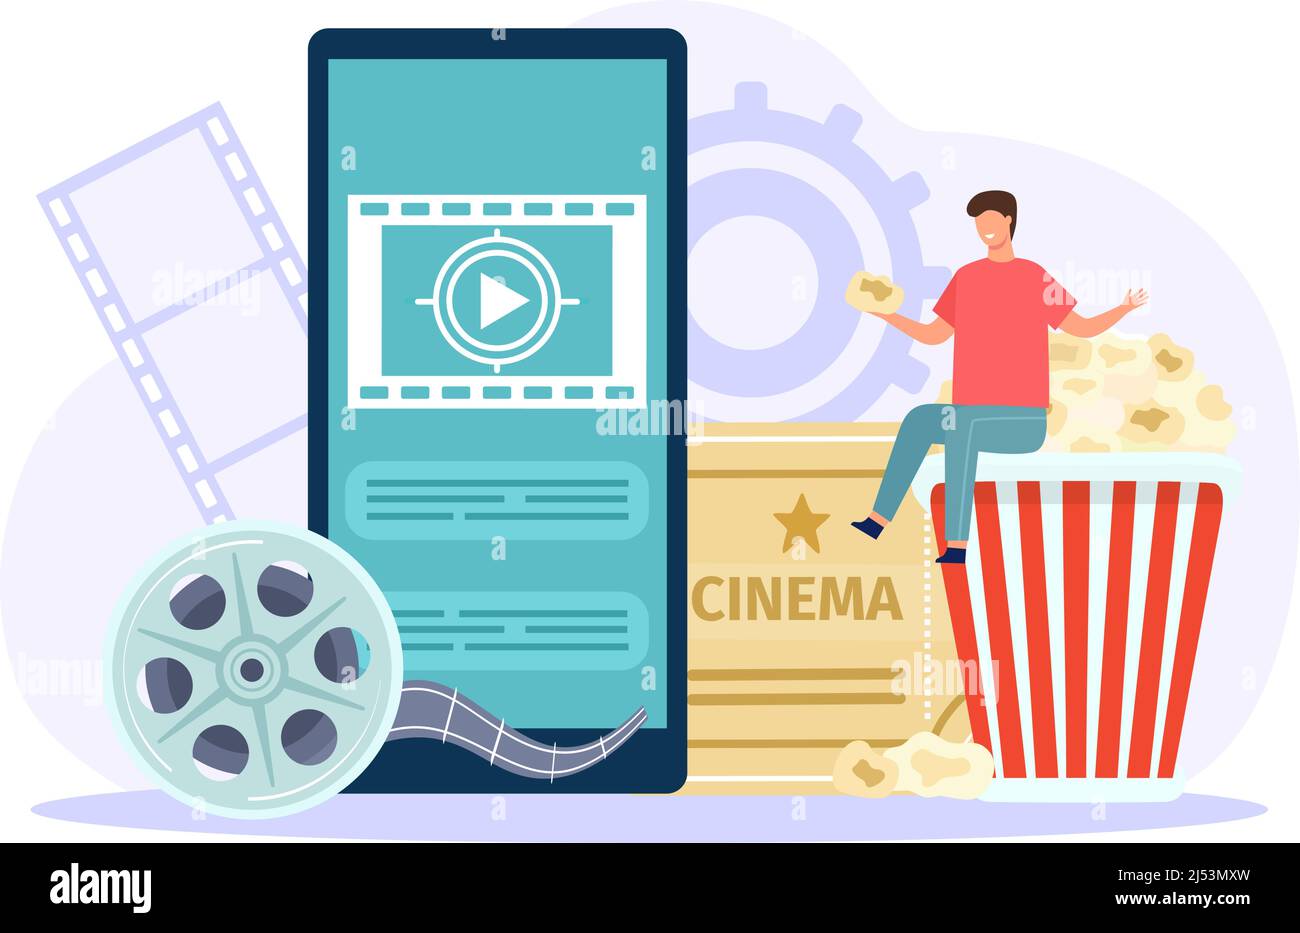 Online cinema service, watch movie at home Stock Vector